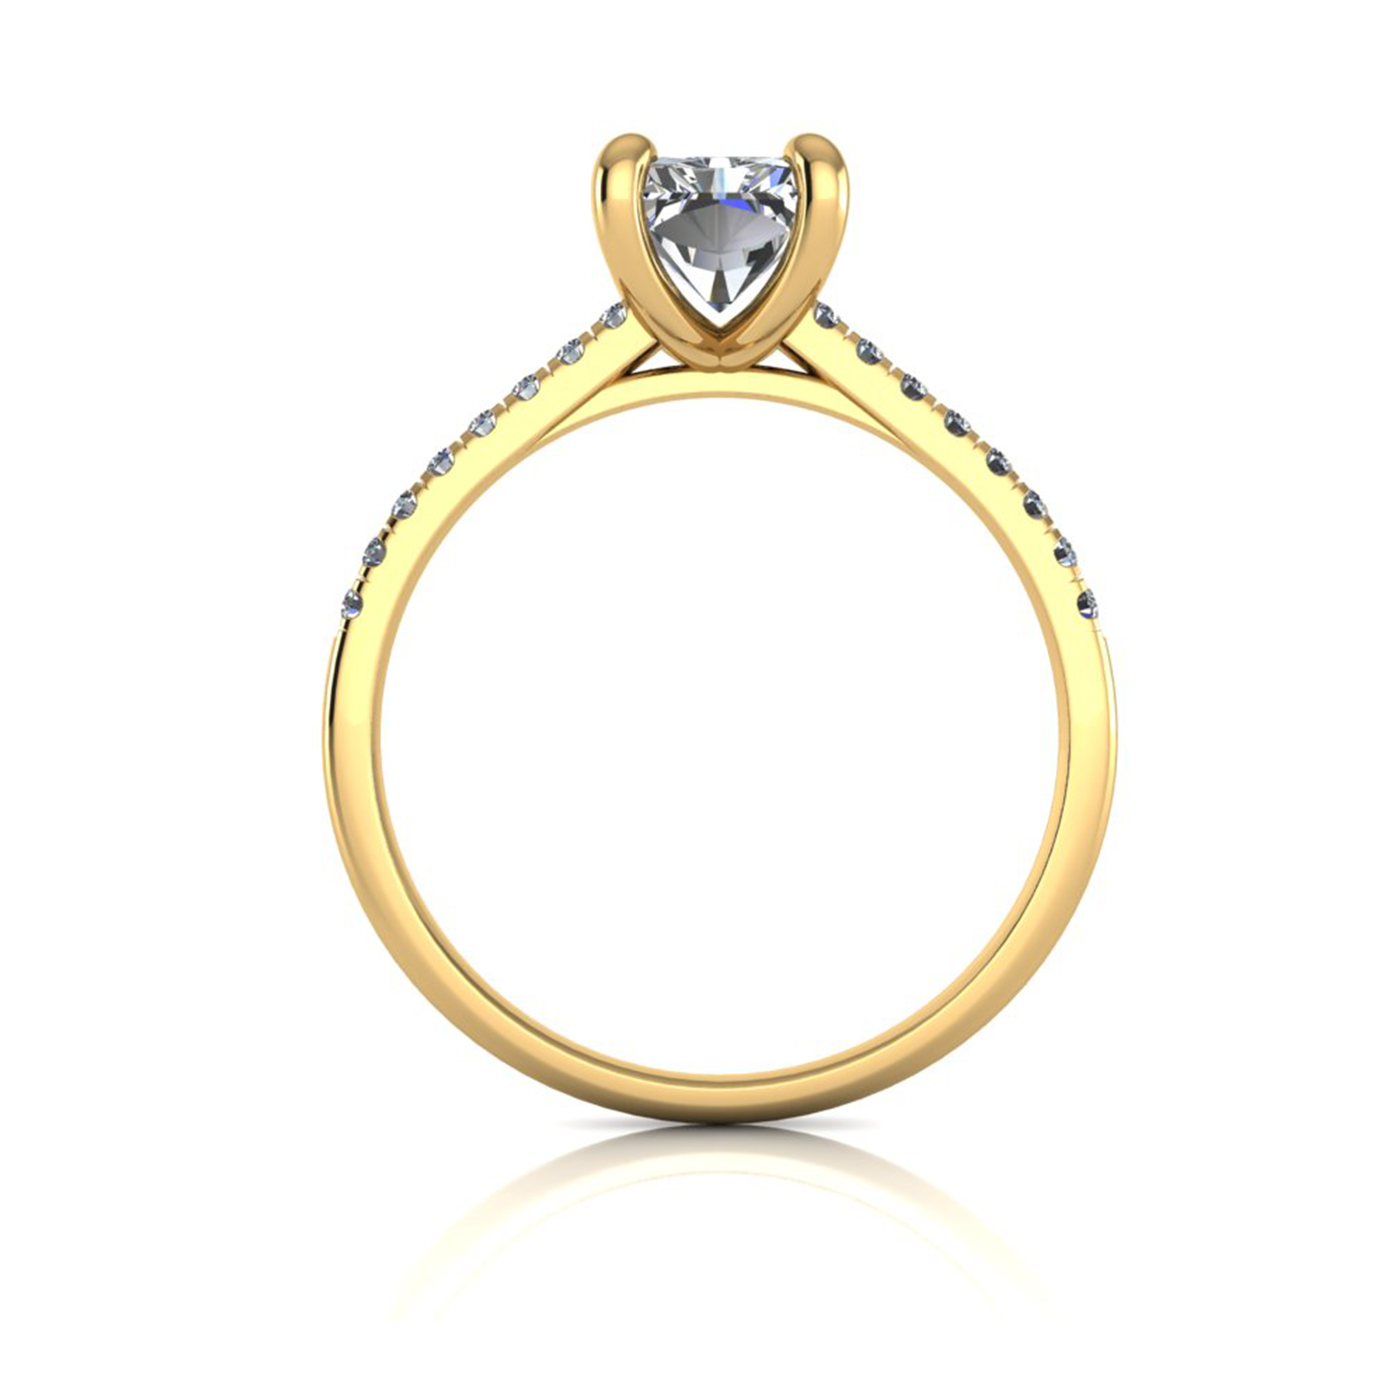 18k yellow gold  1,50 ct 4 prongs radiant cut diamond engagement ring with whisper thin pavÉ set band